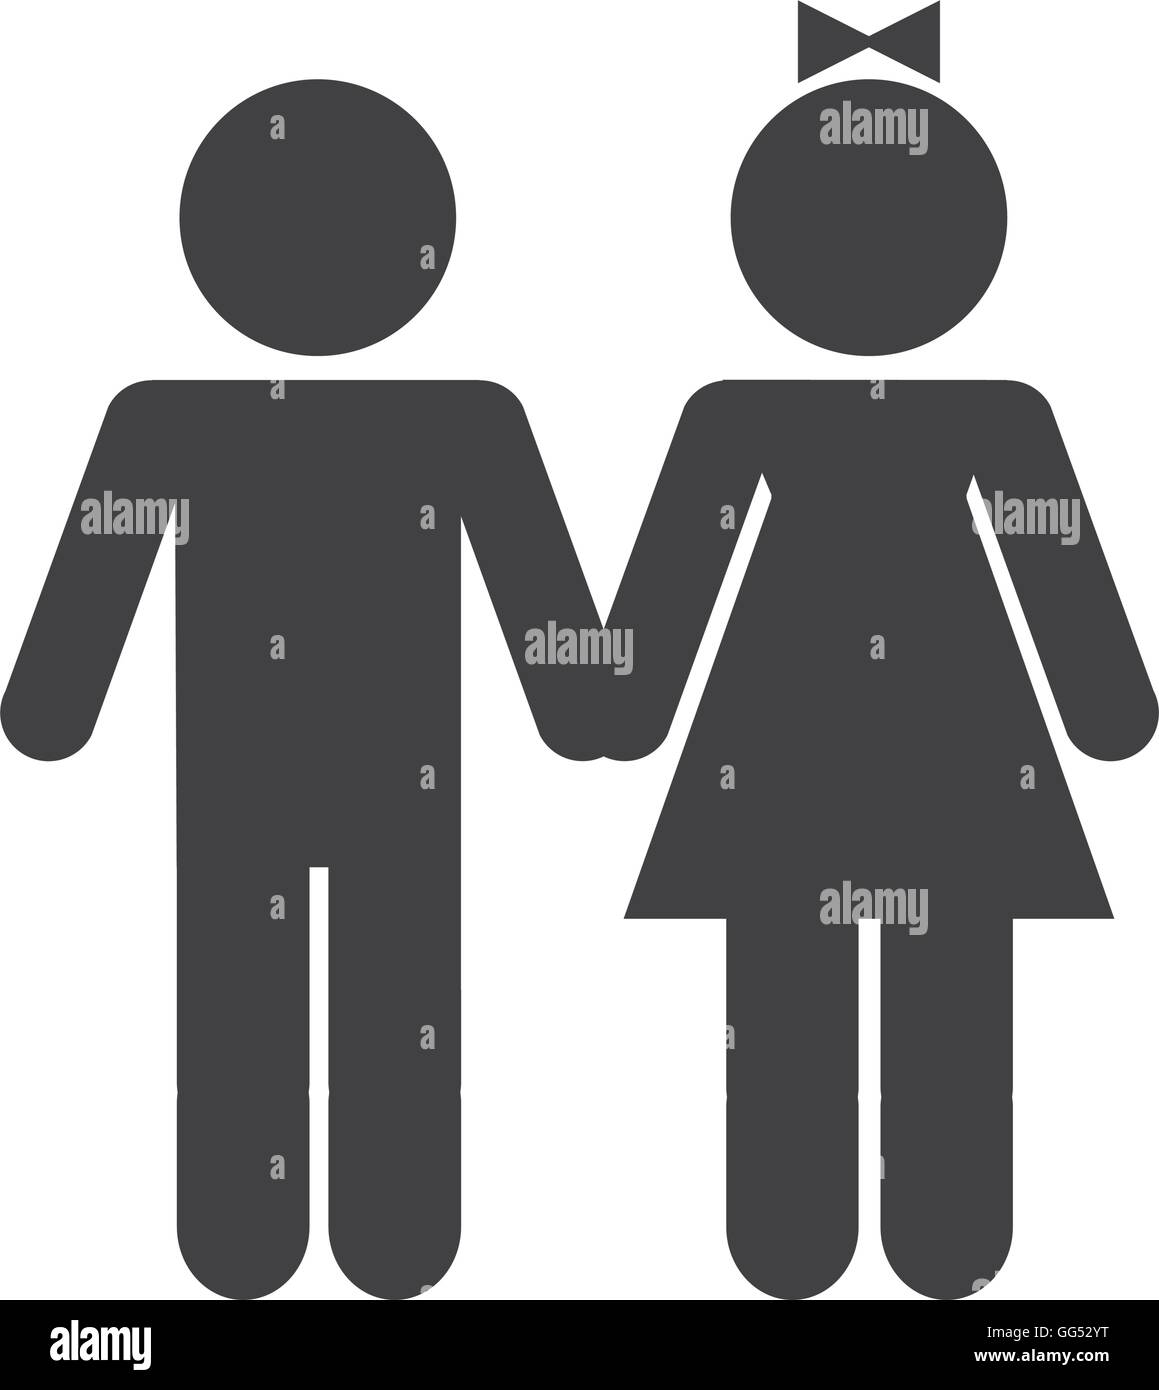 couple silhouette isolated icon Stock Vector